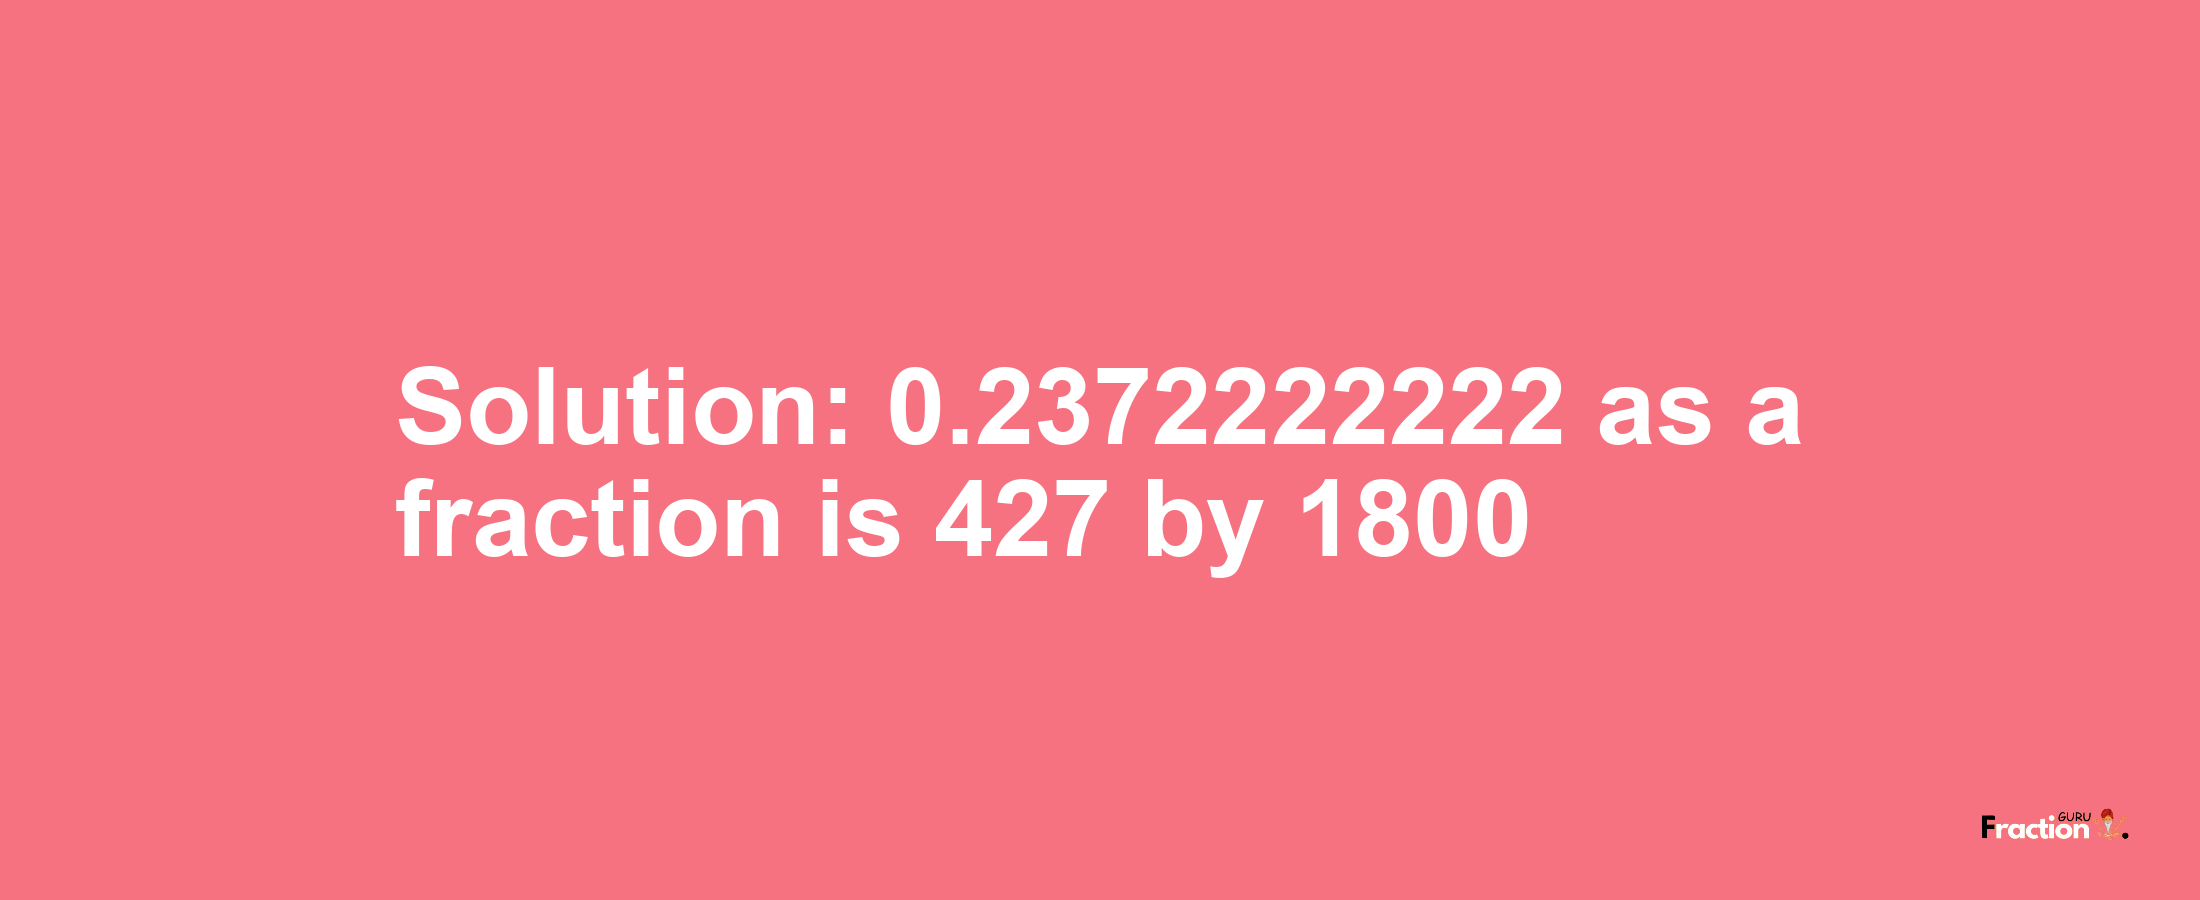 Solution:0.2372222222 as a fraction is 427/1800